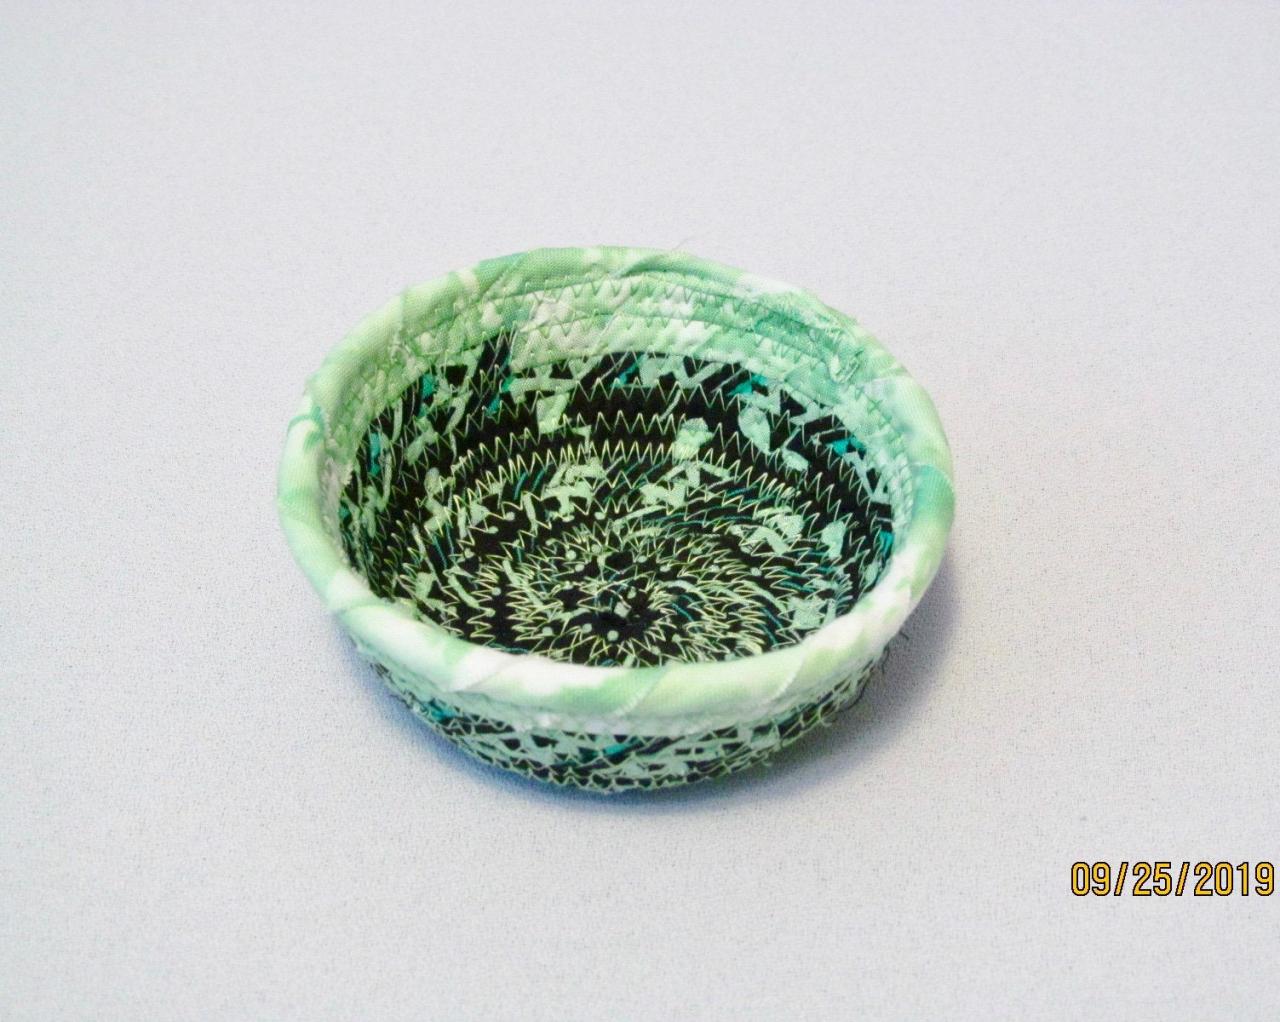 Green And Black Cotton Fabric Coil Bowl